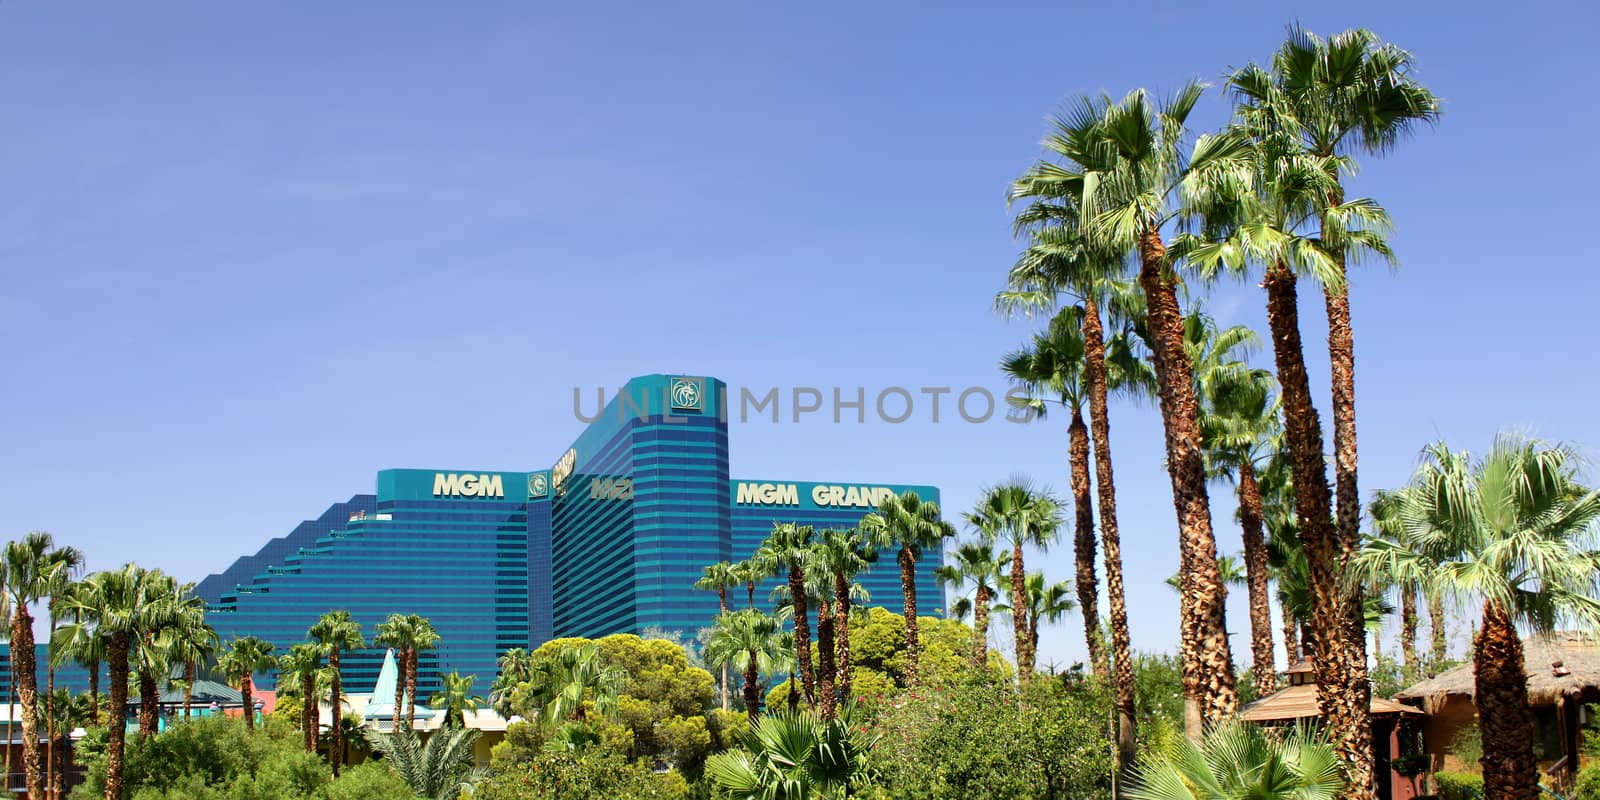 Las Vegas, USA - August 19, 2009: The MGM Grand hotel and casino of Las Vegas is seen here behind palm trees of the neighboring Tropicana Hotel and Casino.  The MGM Grand is one of the largest hotels in the world with over 5,000 rooms available for guests.